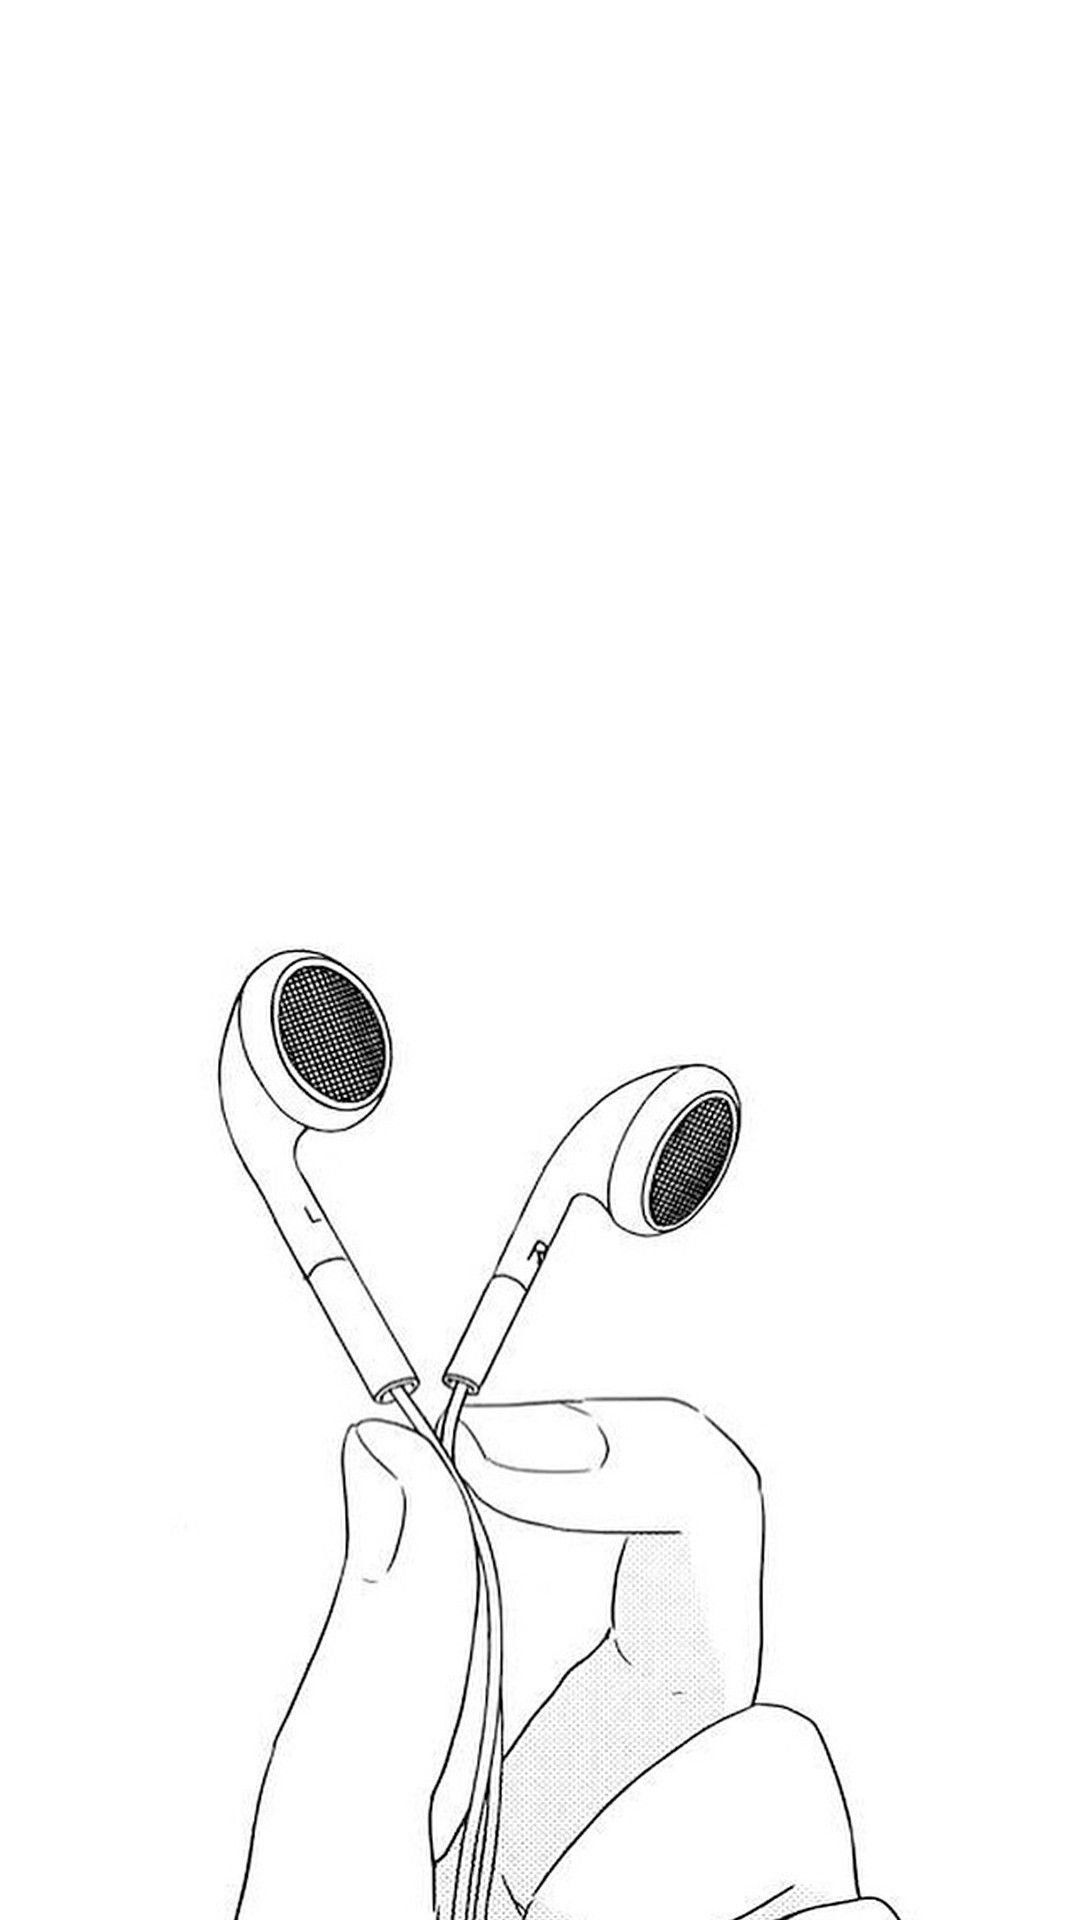 A drawing of someone holding two earbuds - Music